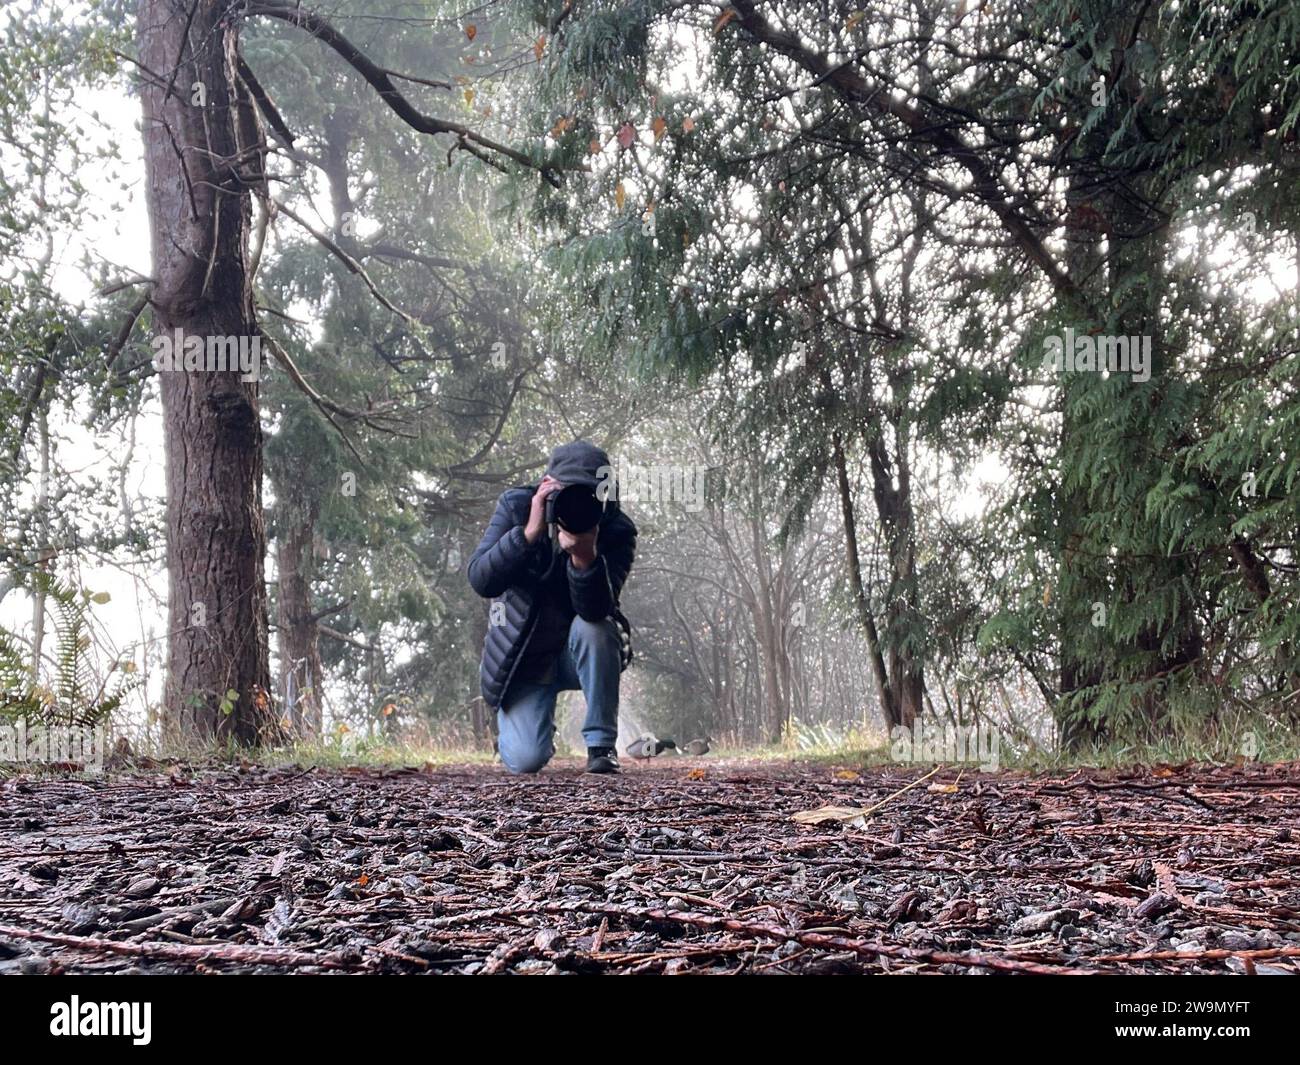 Man crouching in a rural landscape taking a photo with a long lens camera, Vancouver, British Columbia, Canada Stock Photo